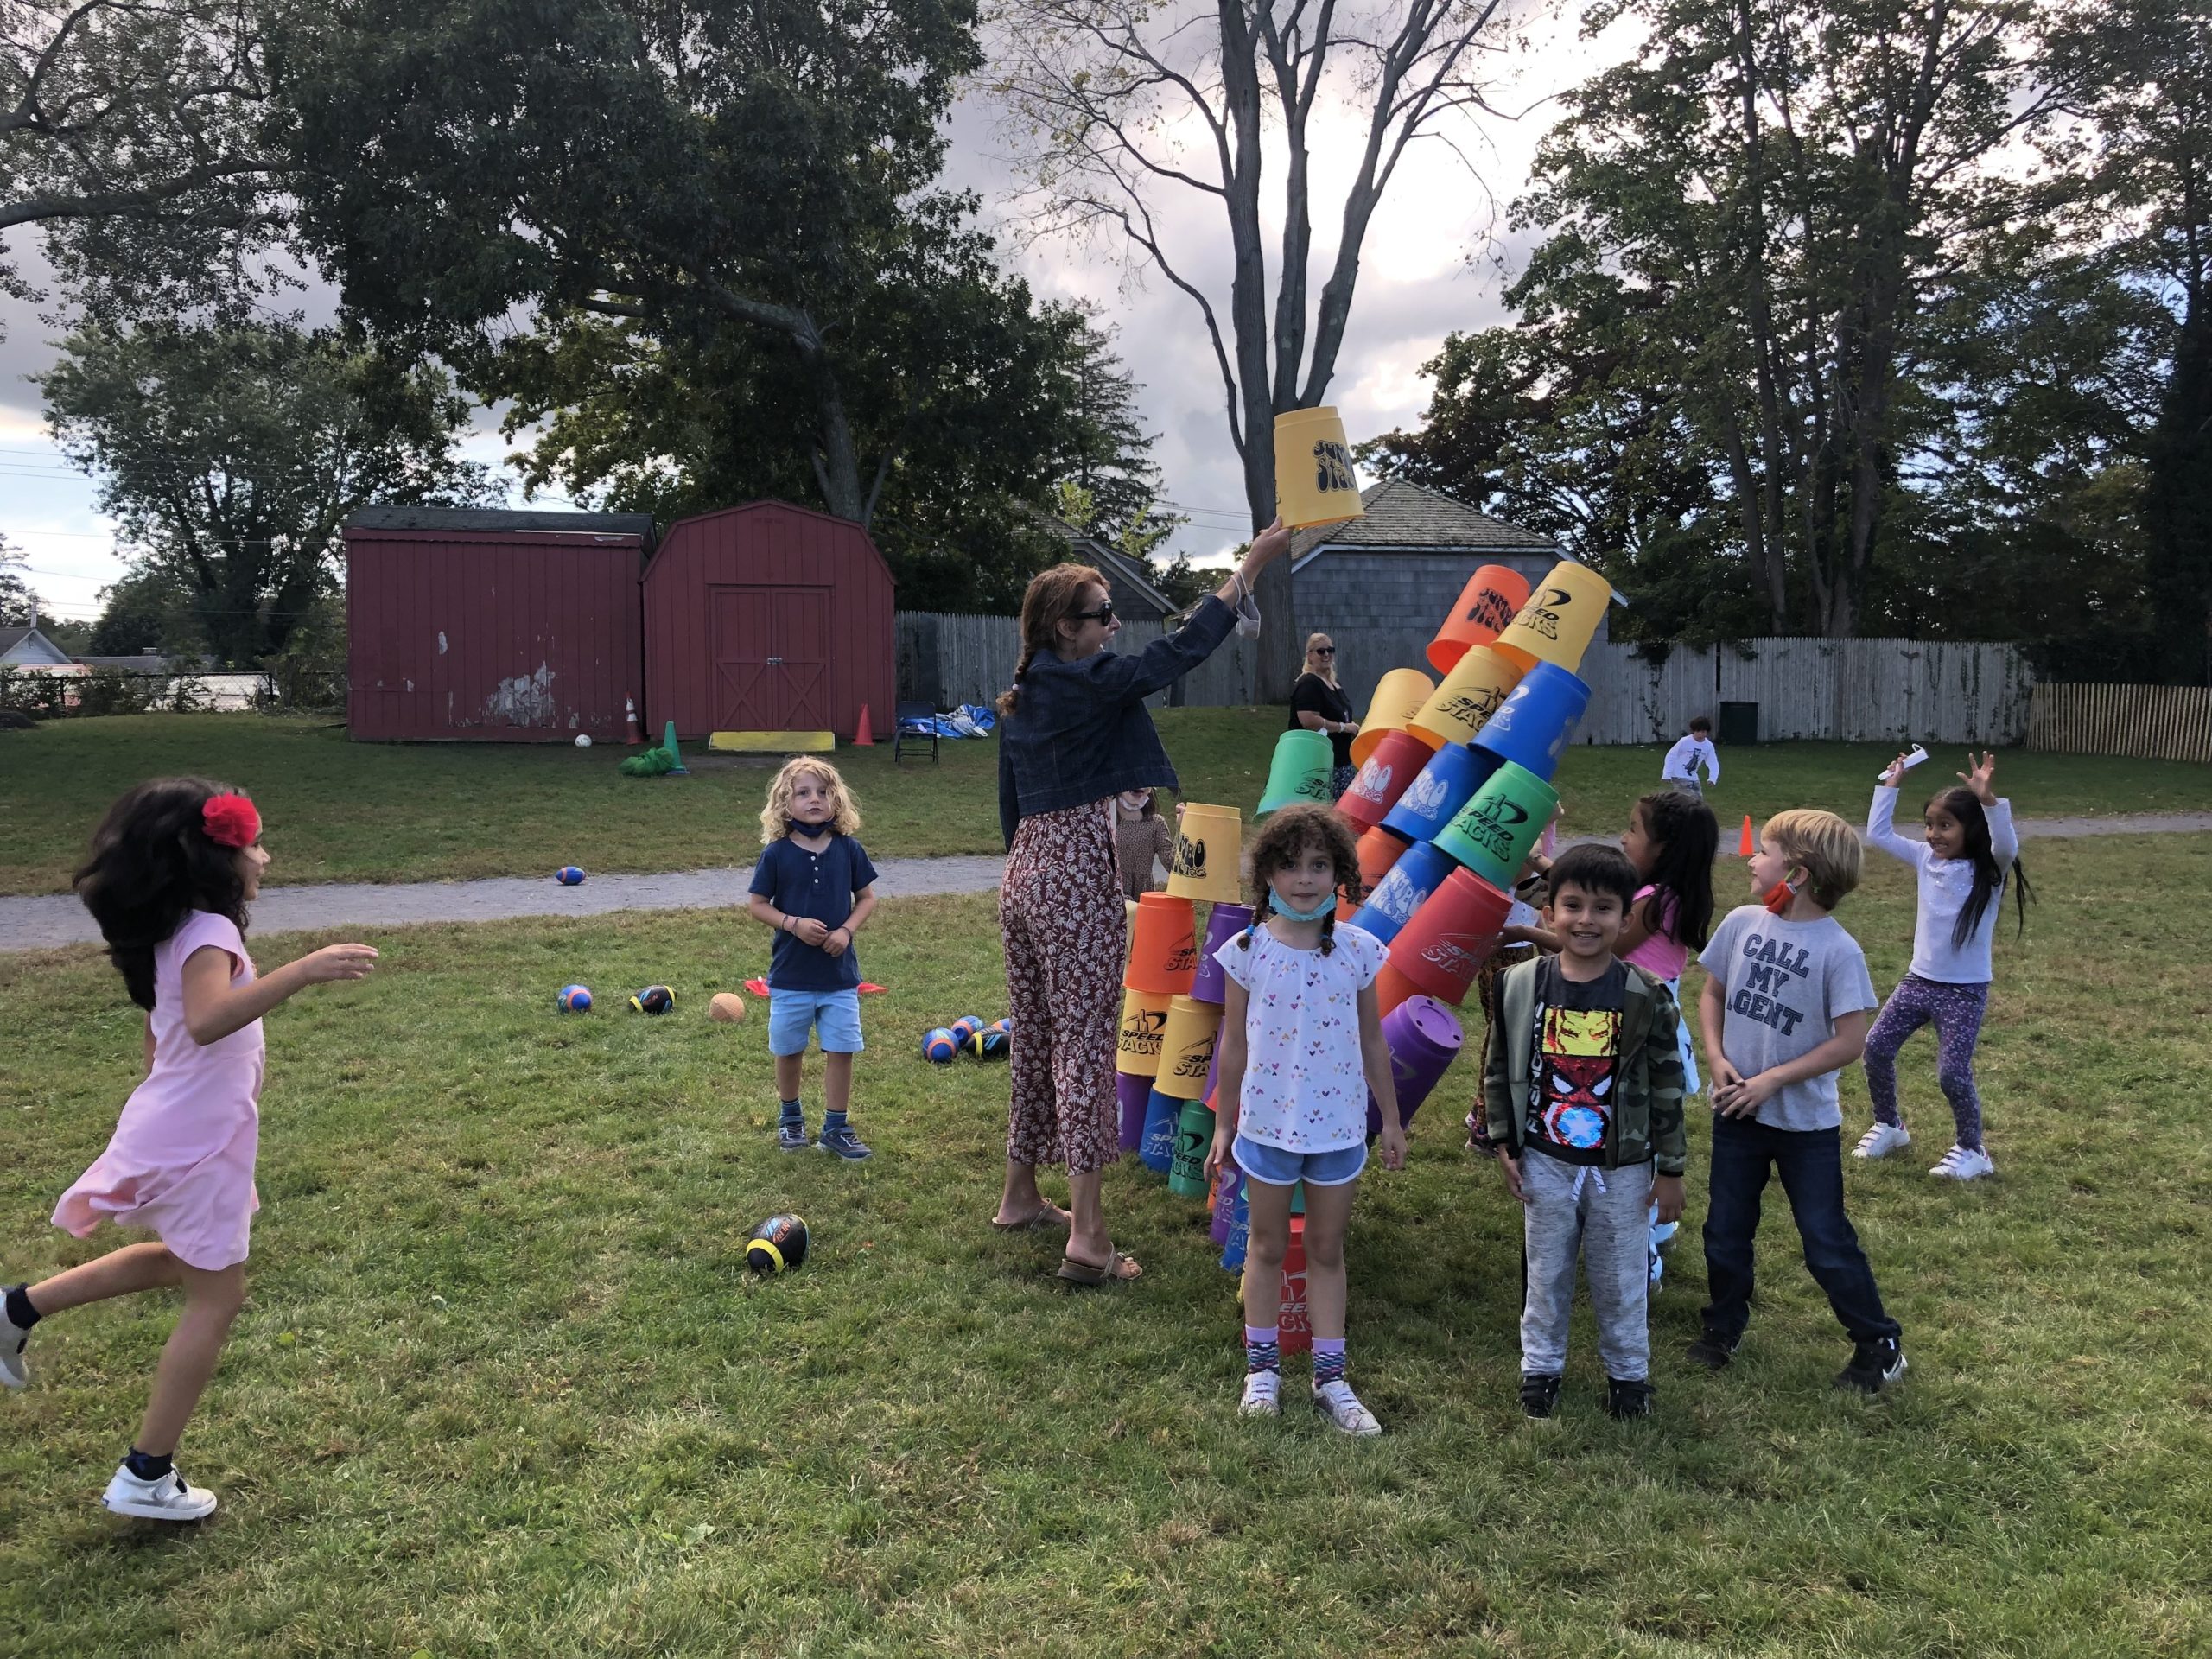 Utilizing outdoor spaces for learning is important for the Sag Harbor School District. Through outdoor recess and the occasional mask break, Sag Harbor Elementary Students have been strengthening their literacy skills, spending time with friends on the playground and working on their team building skills.